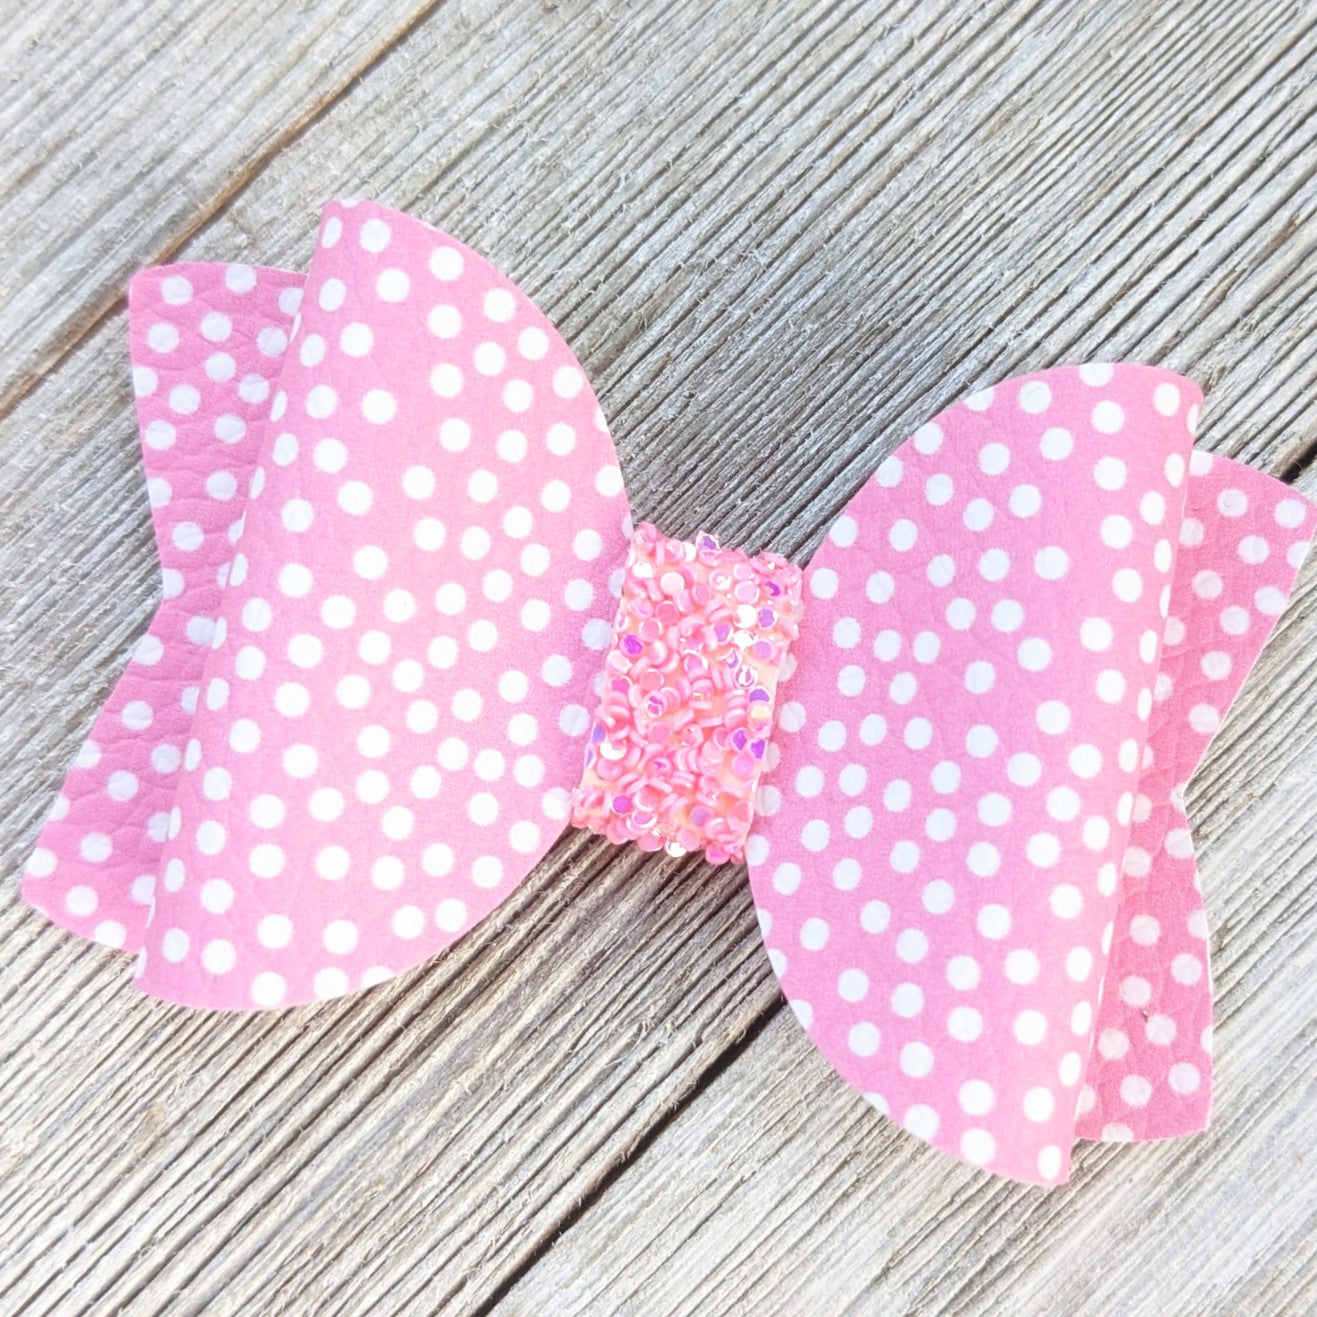 2.5" Pink Faux Leather Glitter Bow